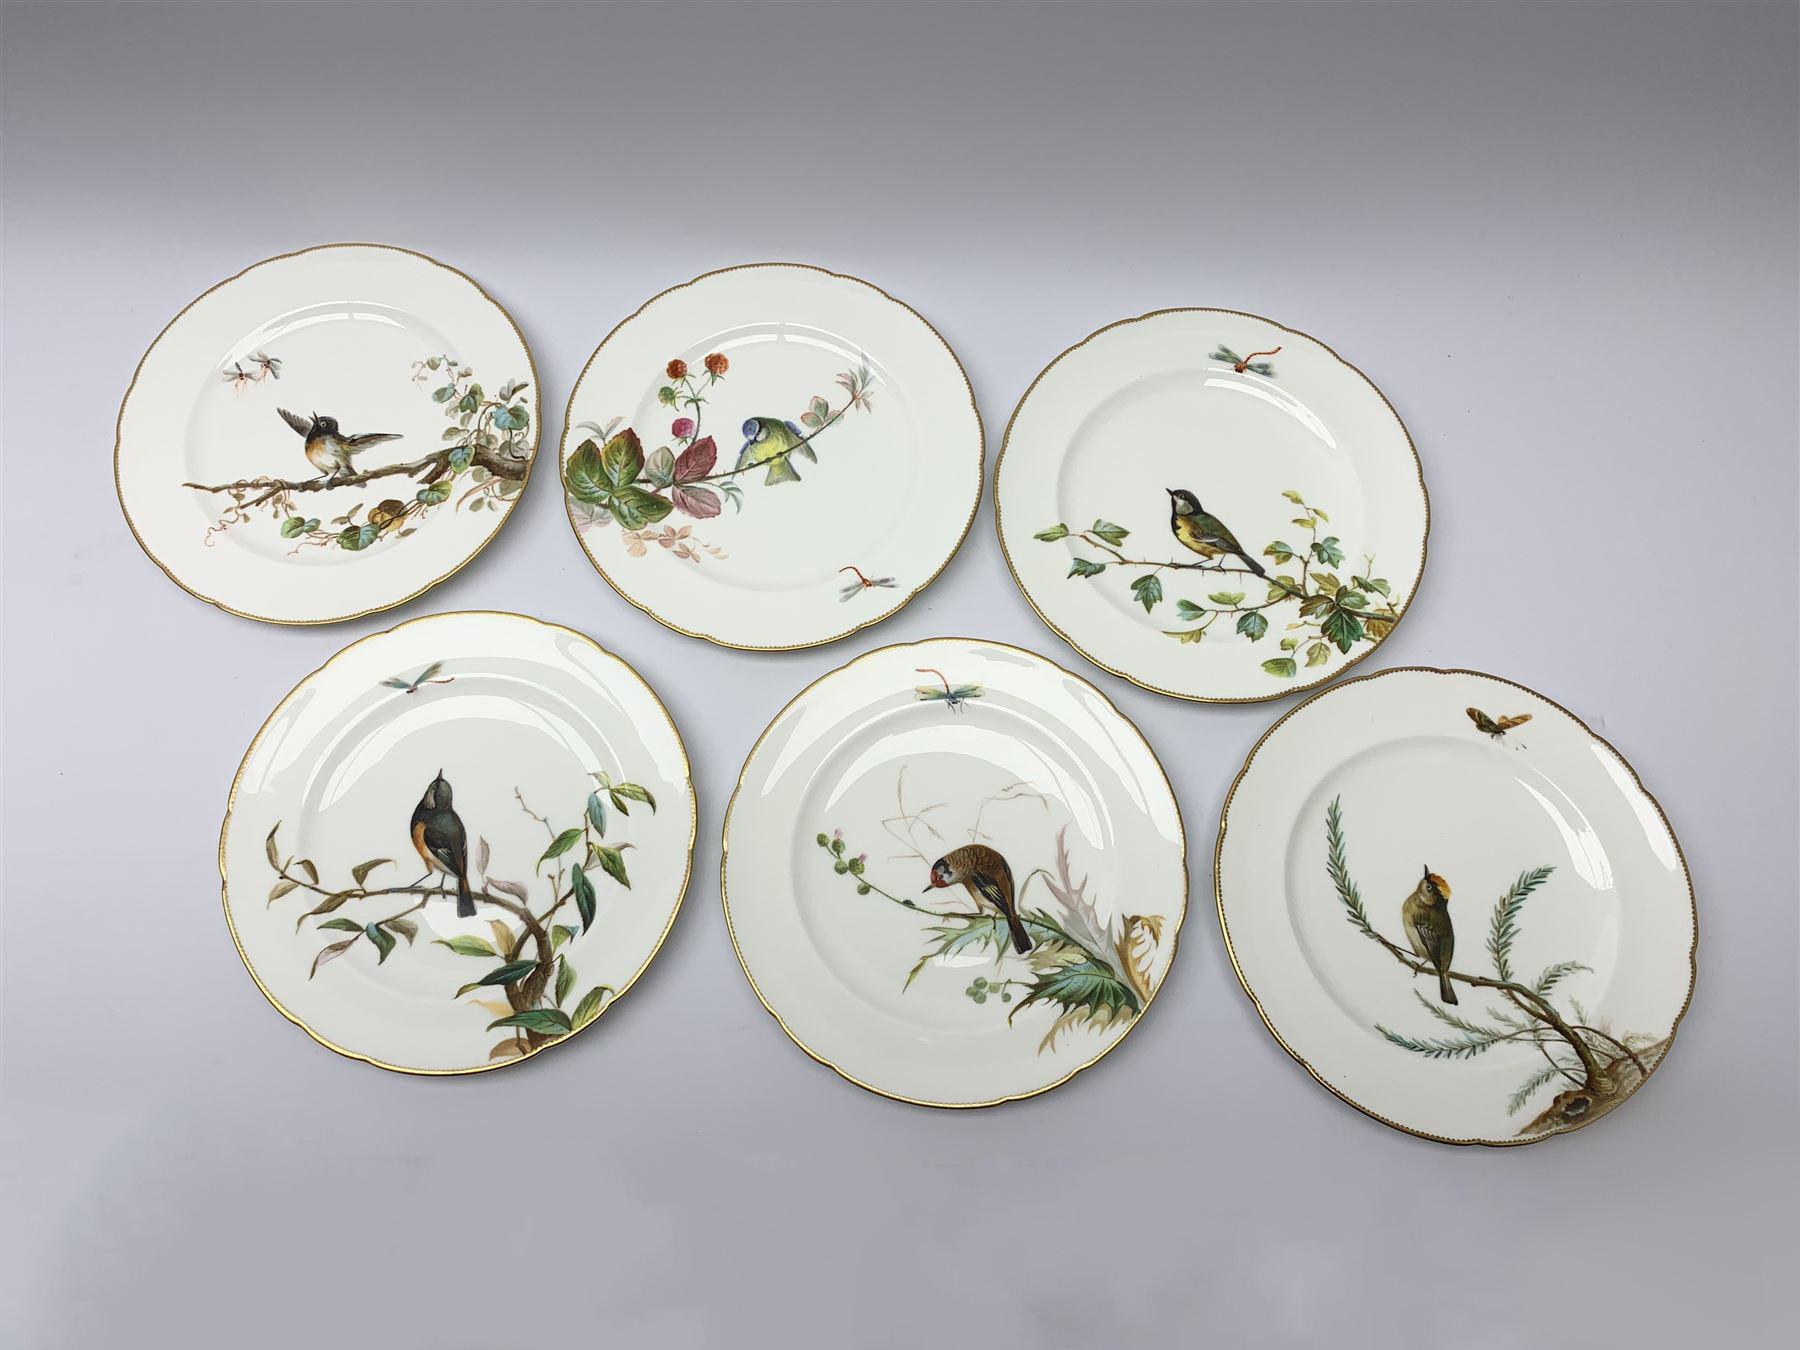 19th century Minton dessert service, comprising 4 comports, 1 tazza, and 12 plates, each handpainted with birds perched upon branches, and further detailed with Insects and heightened in Gilt. With printed retailers mark beneath for John Mortlock